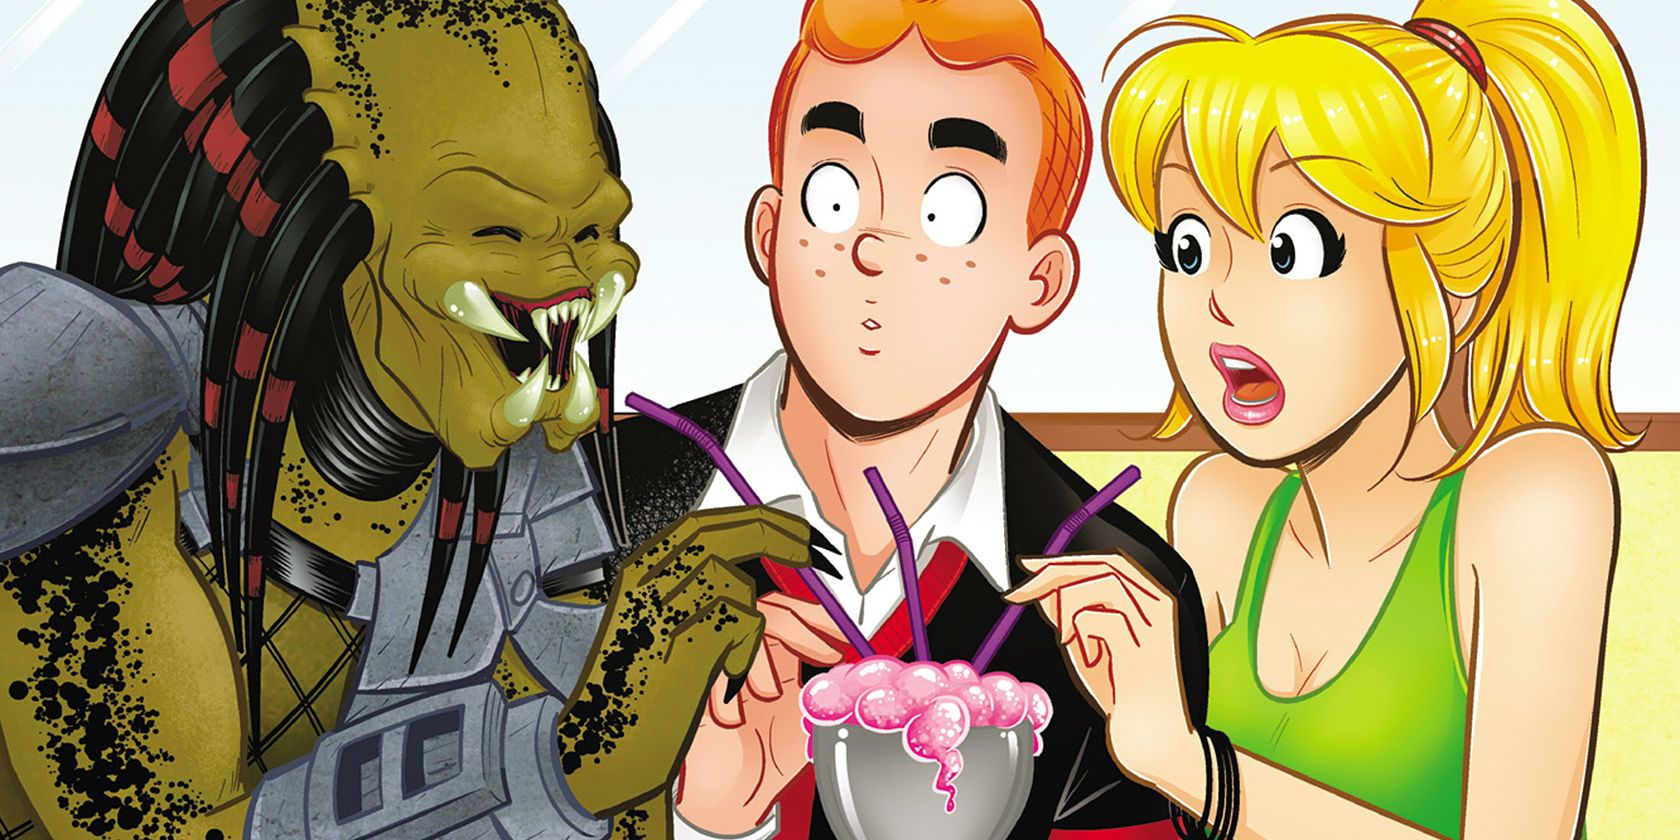 The Predator happily drinks a milkshake next to the startled Archie and Betty